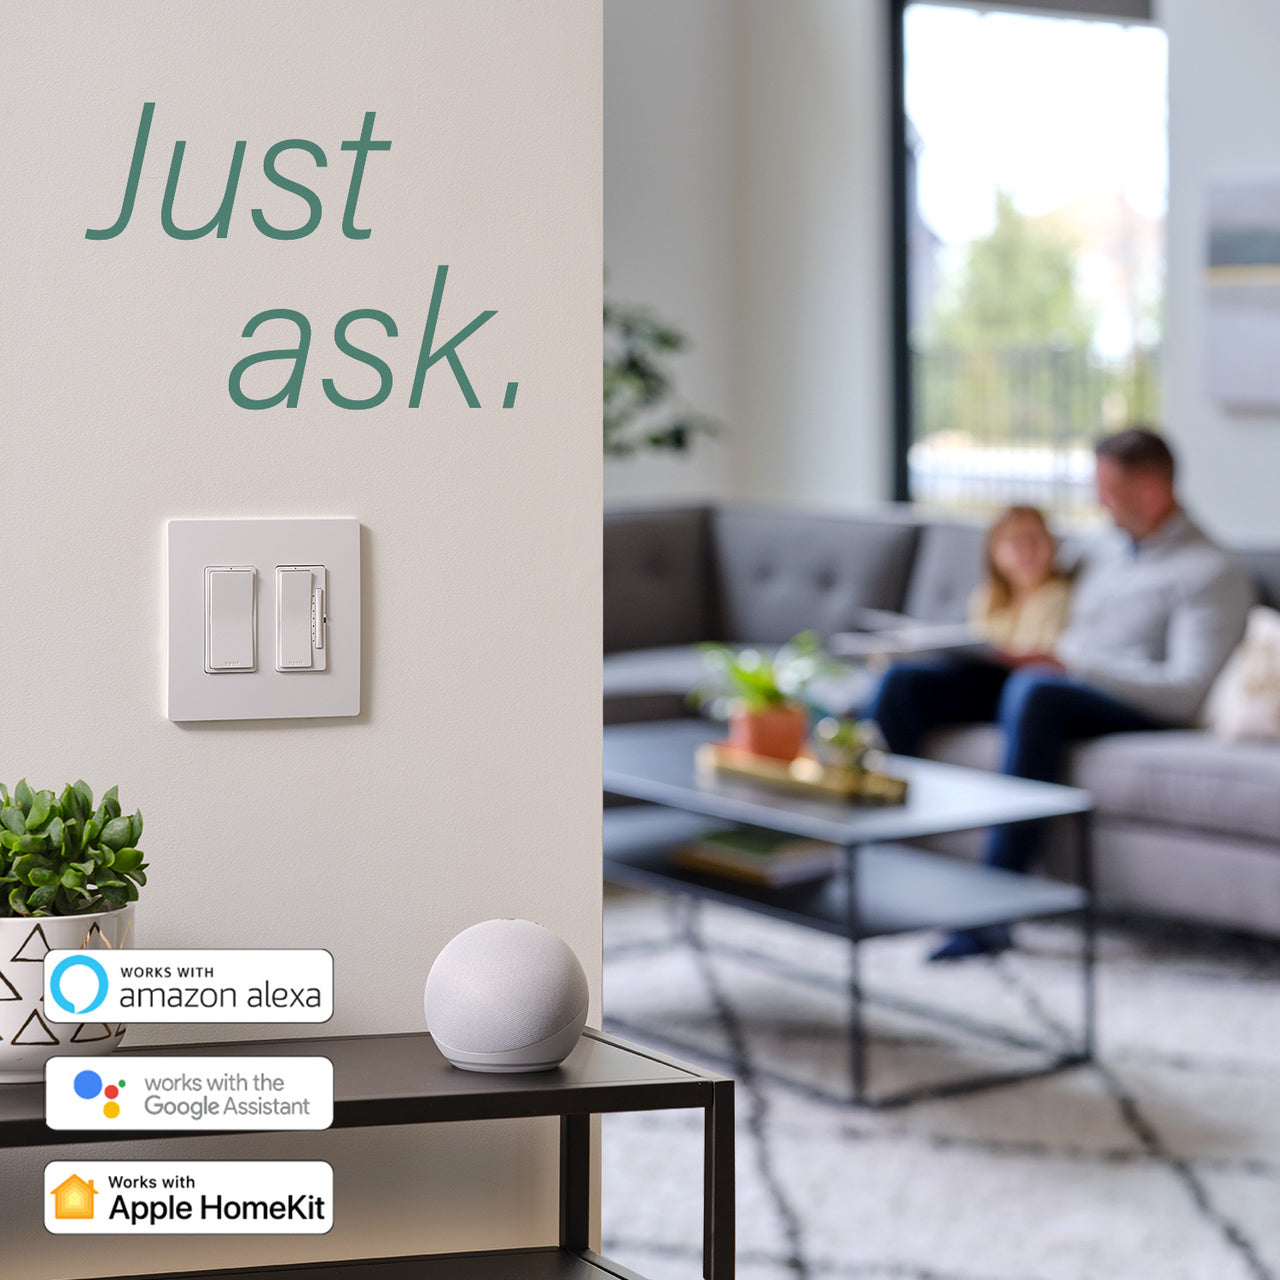 Smart 15A Outlet with Netatmo